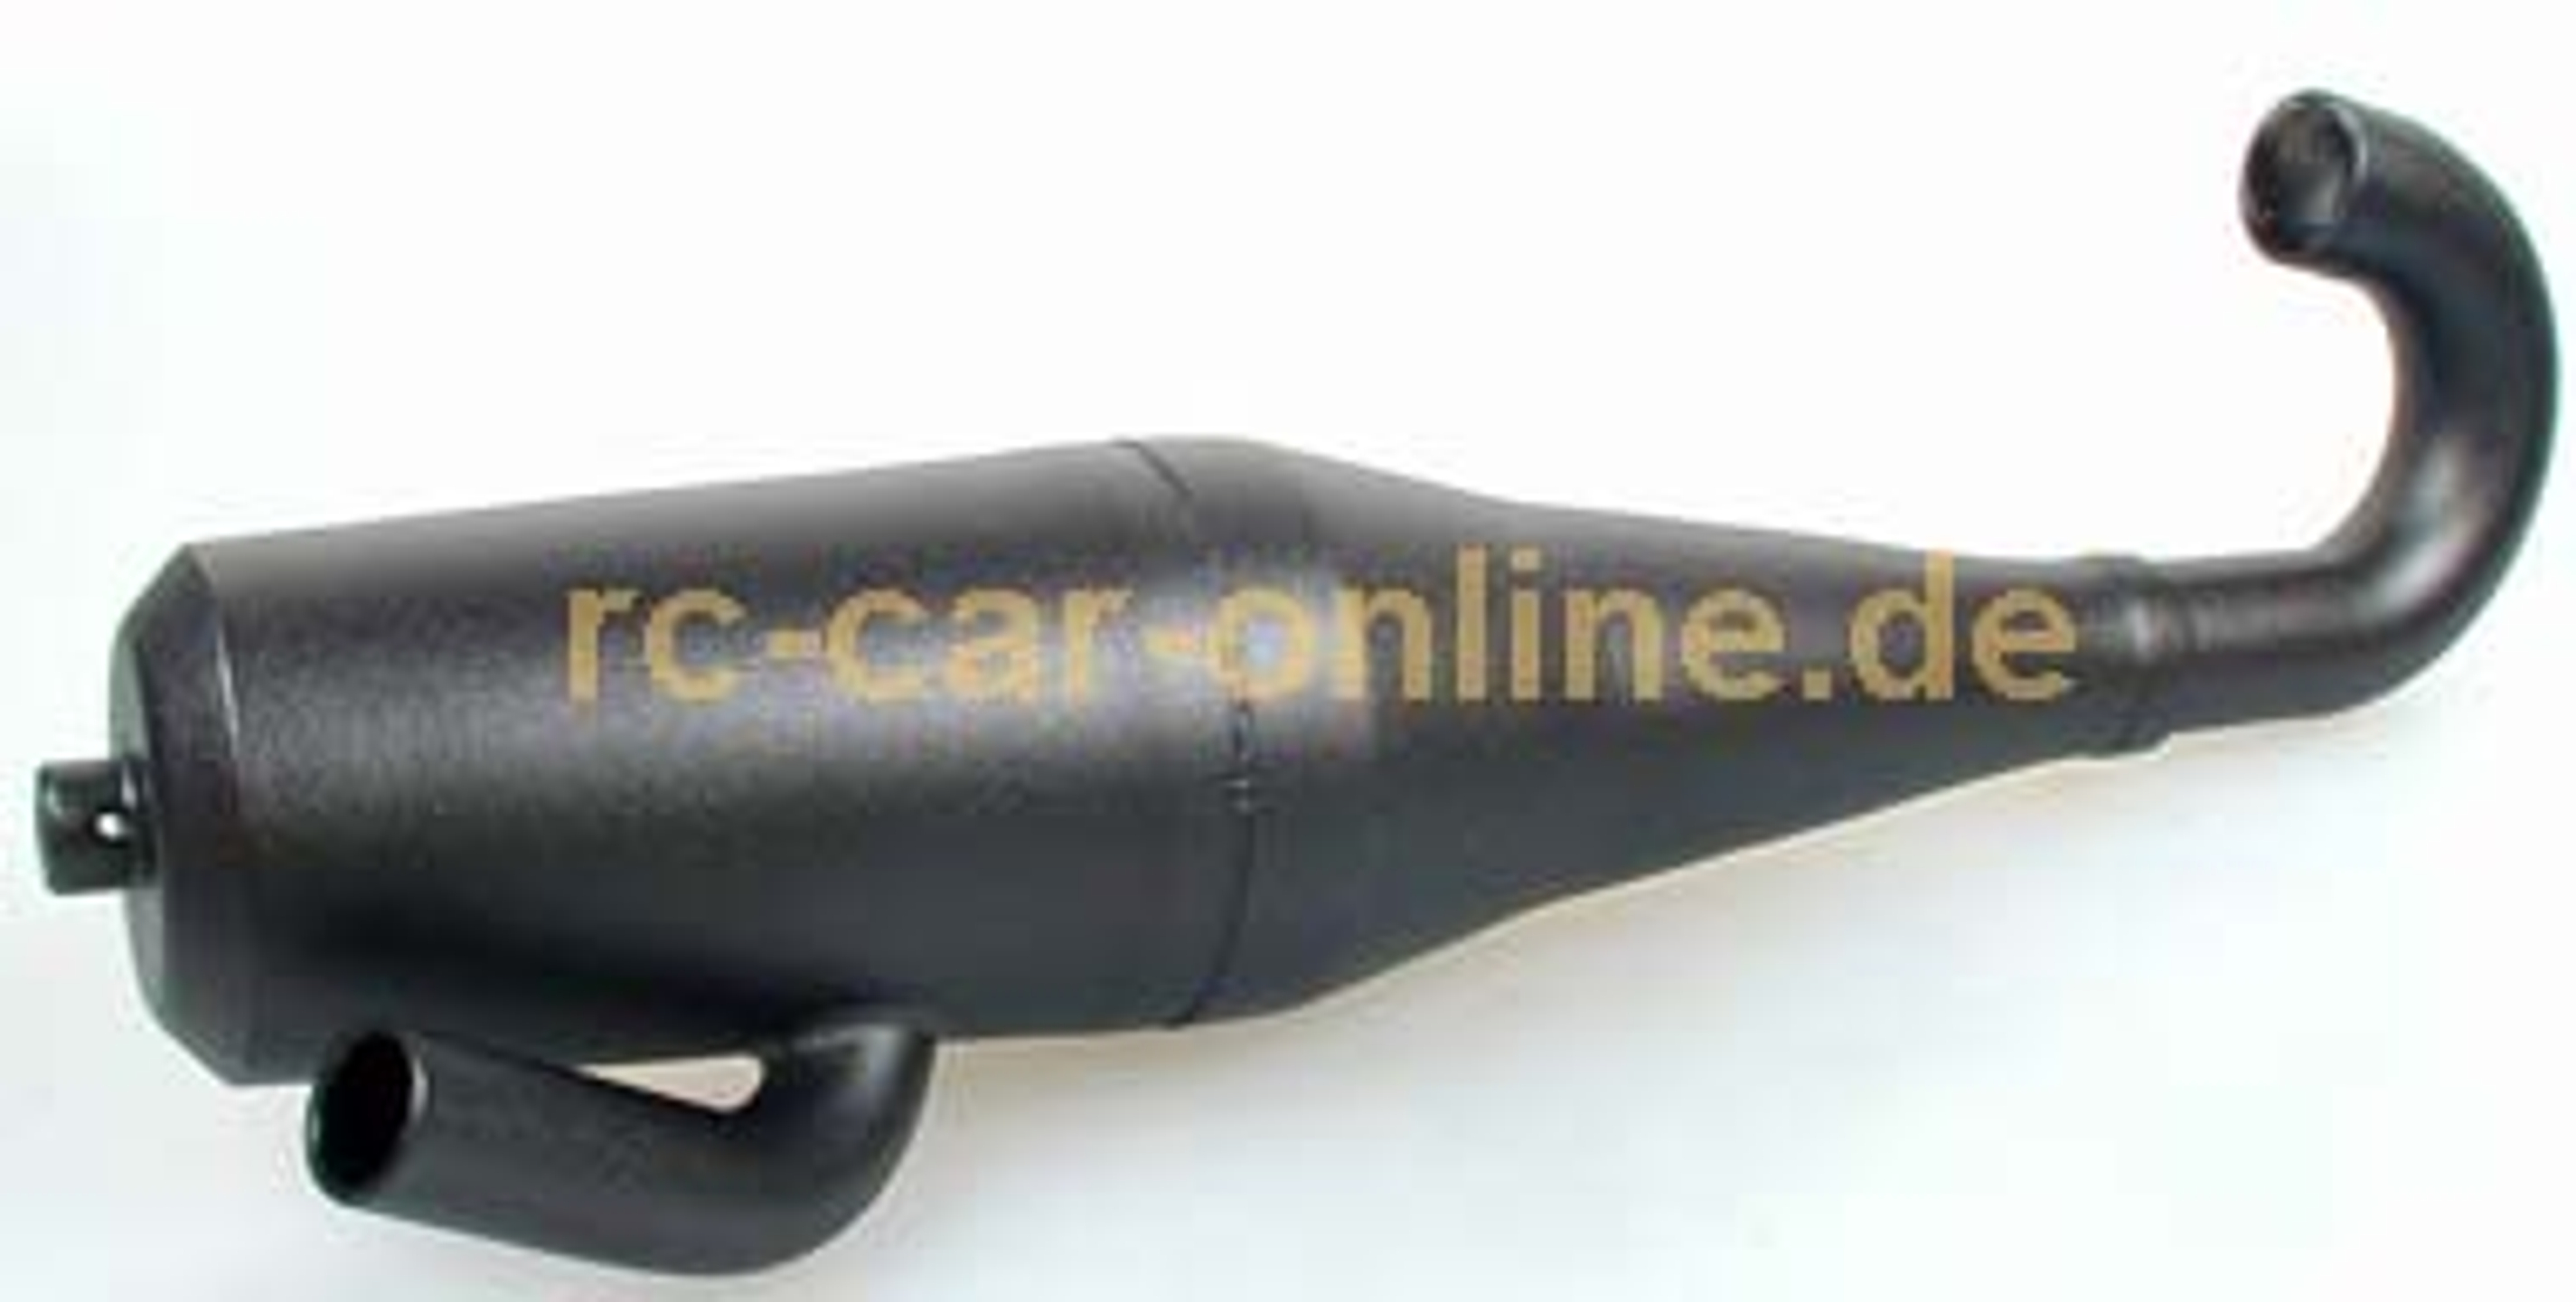 6293/01 FG Tuning pipe 1:6 - 1pce.